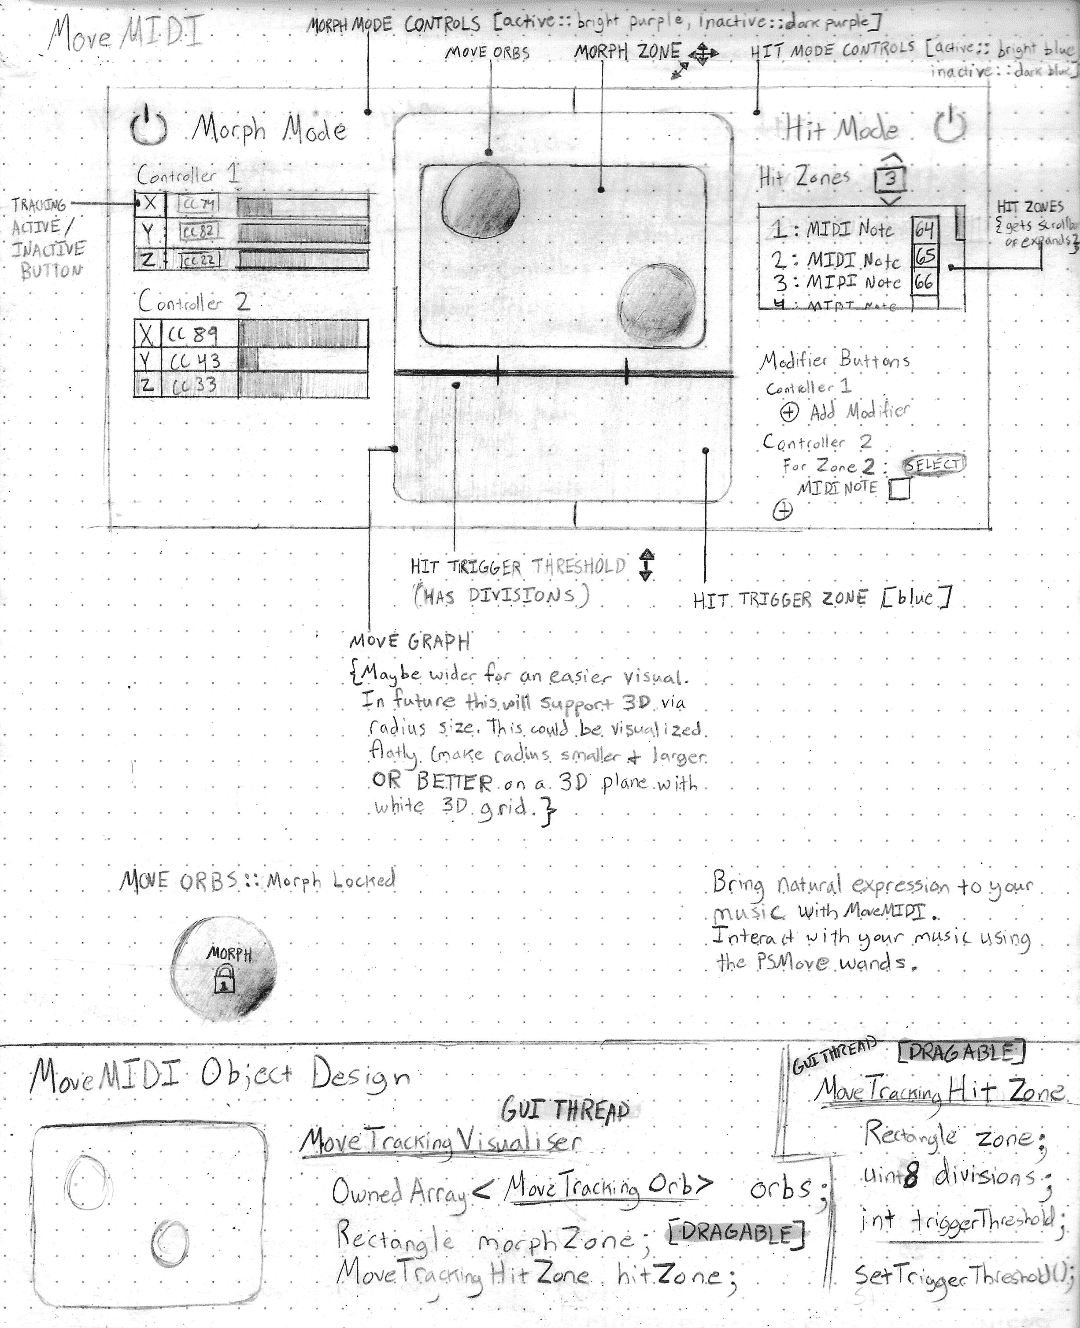 A hand-drawn sketch depicting a UI concept of MoveMIDI software. It contains a 3D visualization in the center with spheres. On the left it shows controls for Morph Mode, and on the right it shows controls for Hit Mode.